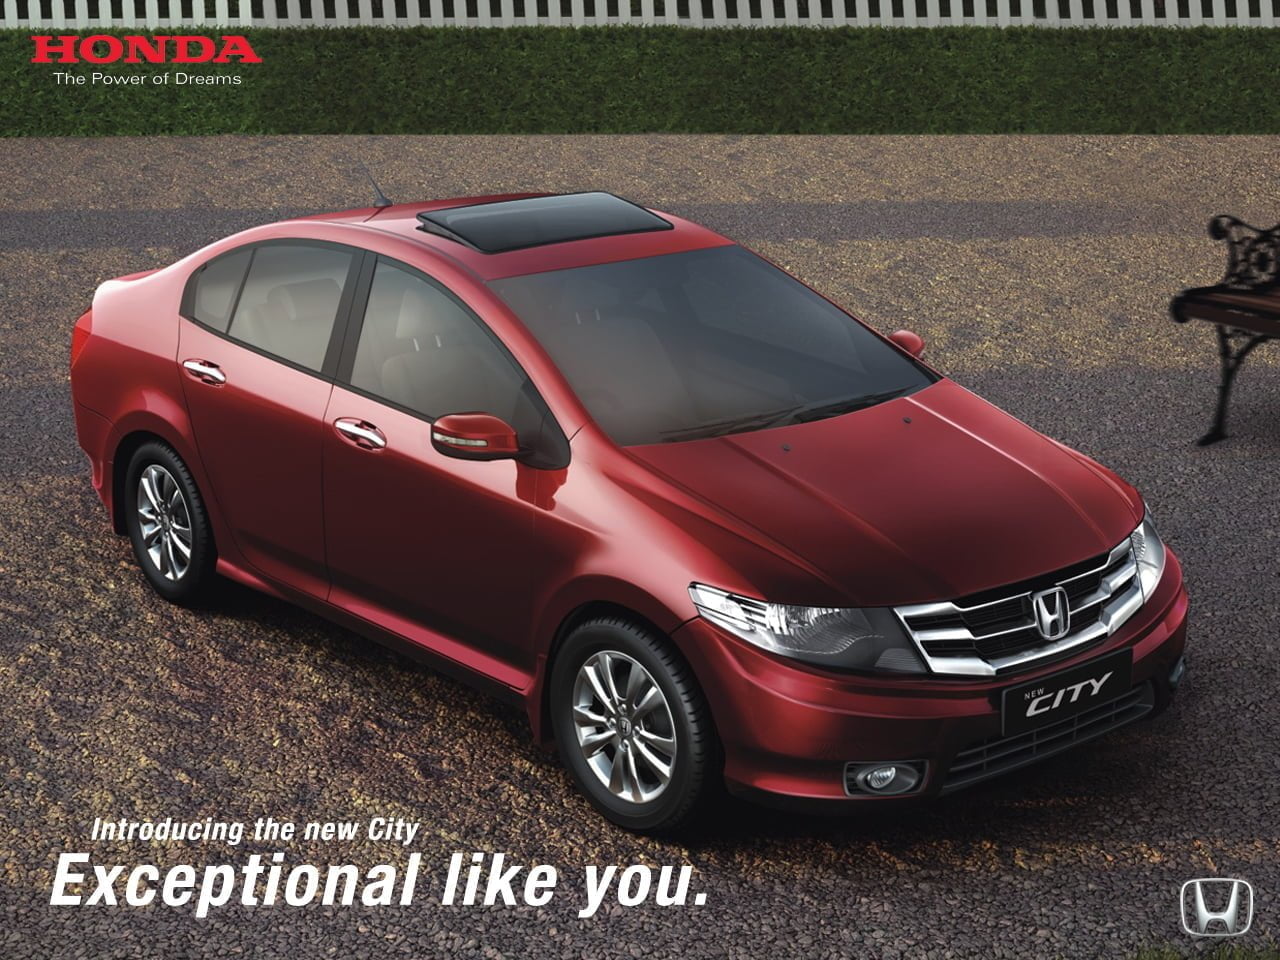 Honda City Review 2012 Price Features Of New Model